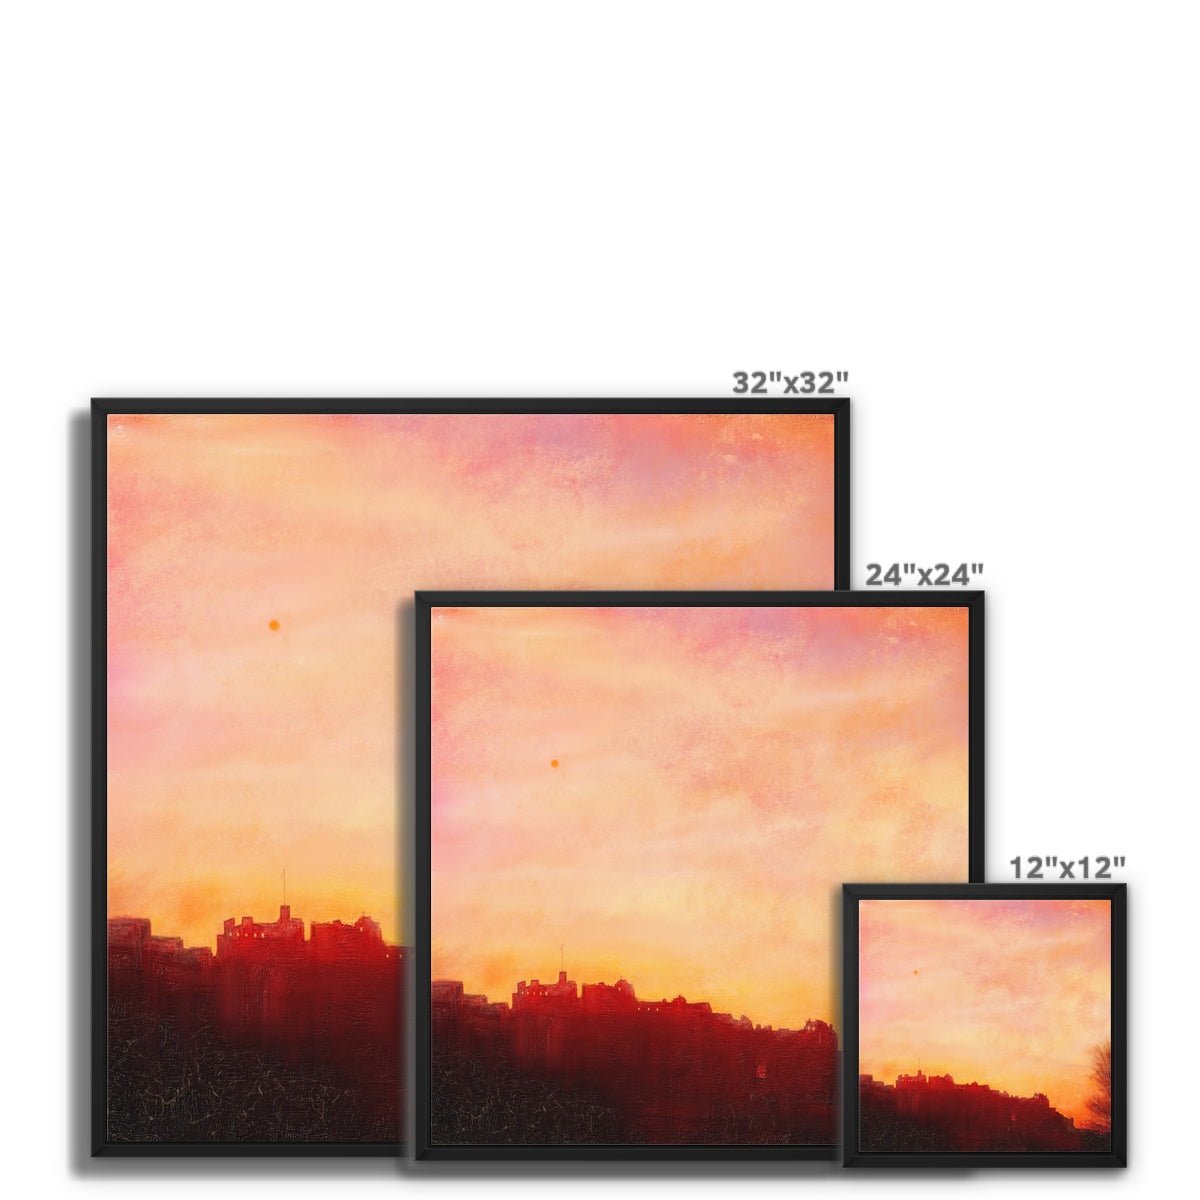 Edinburgh Castle Sunset Painting | Framed Canvas From Scotland-Floating Framed Canvas Prints-Historic & Iconic Scotland Art Gallery-Paintings, Prints, Homeware, Art Gifts From Scotland By Scottish Artist Kevin Hunter